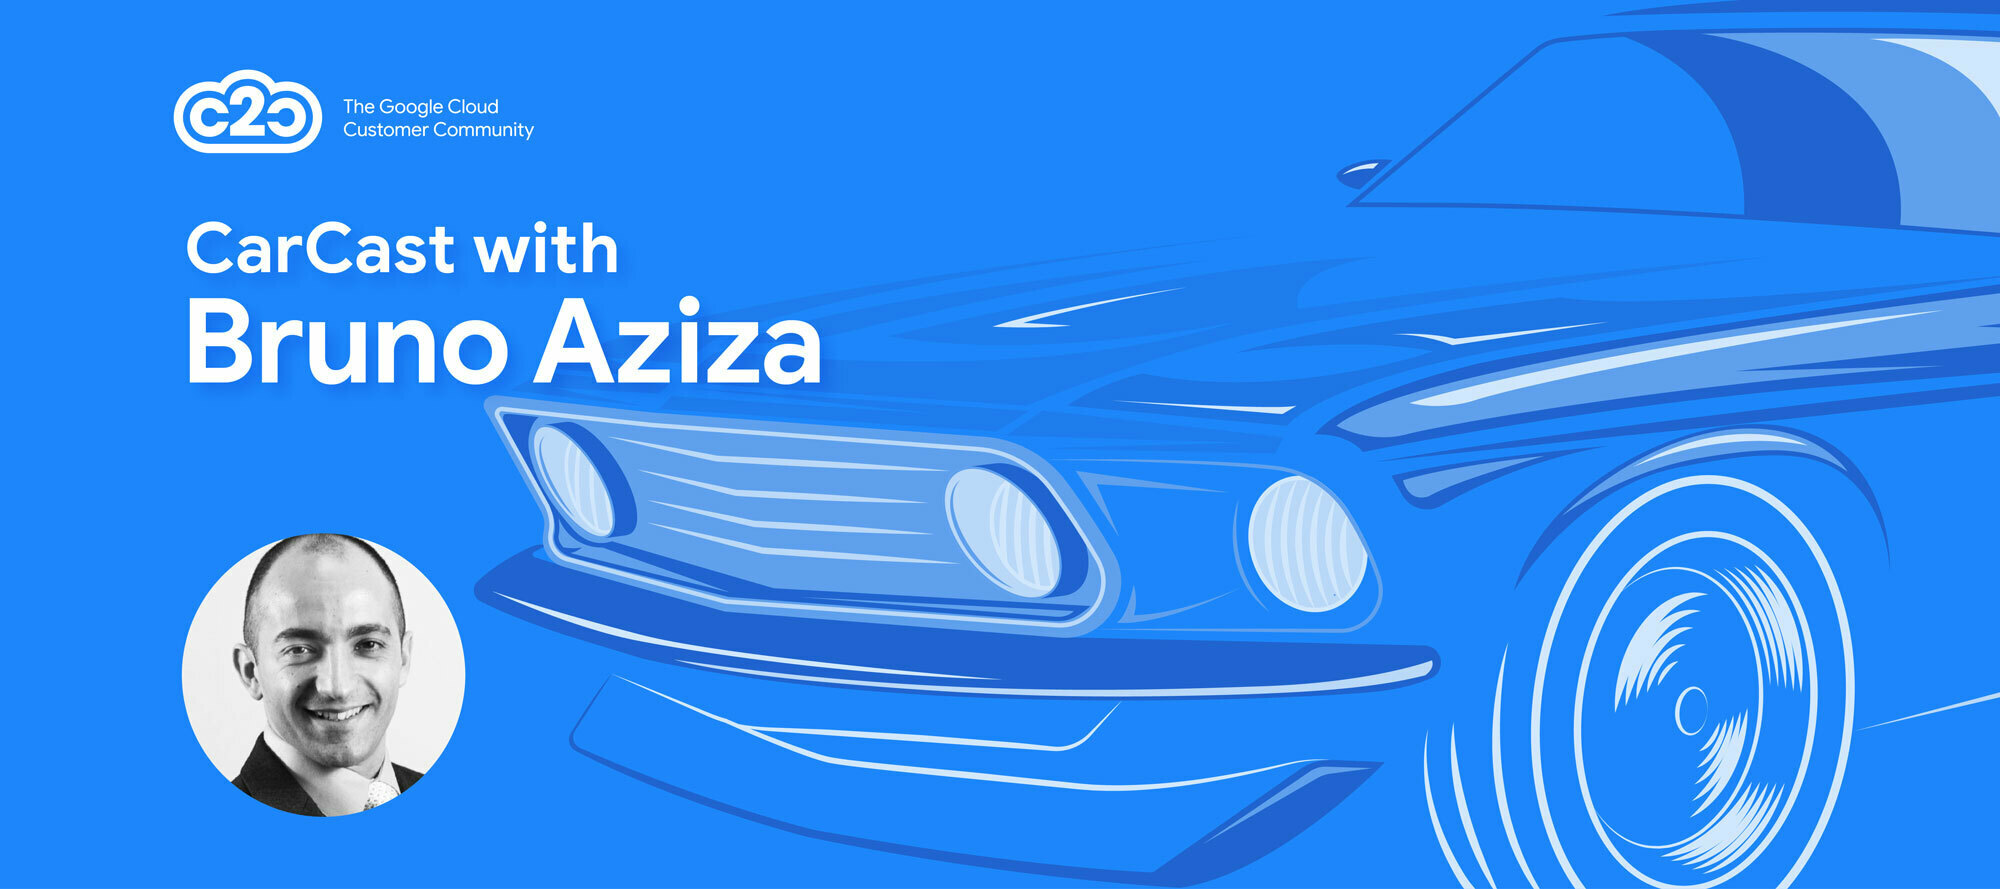 CarCast with Bruno Aziza 3/19: Data! What Is it Good For?